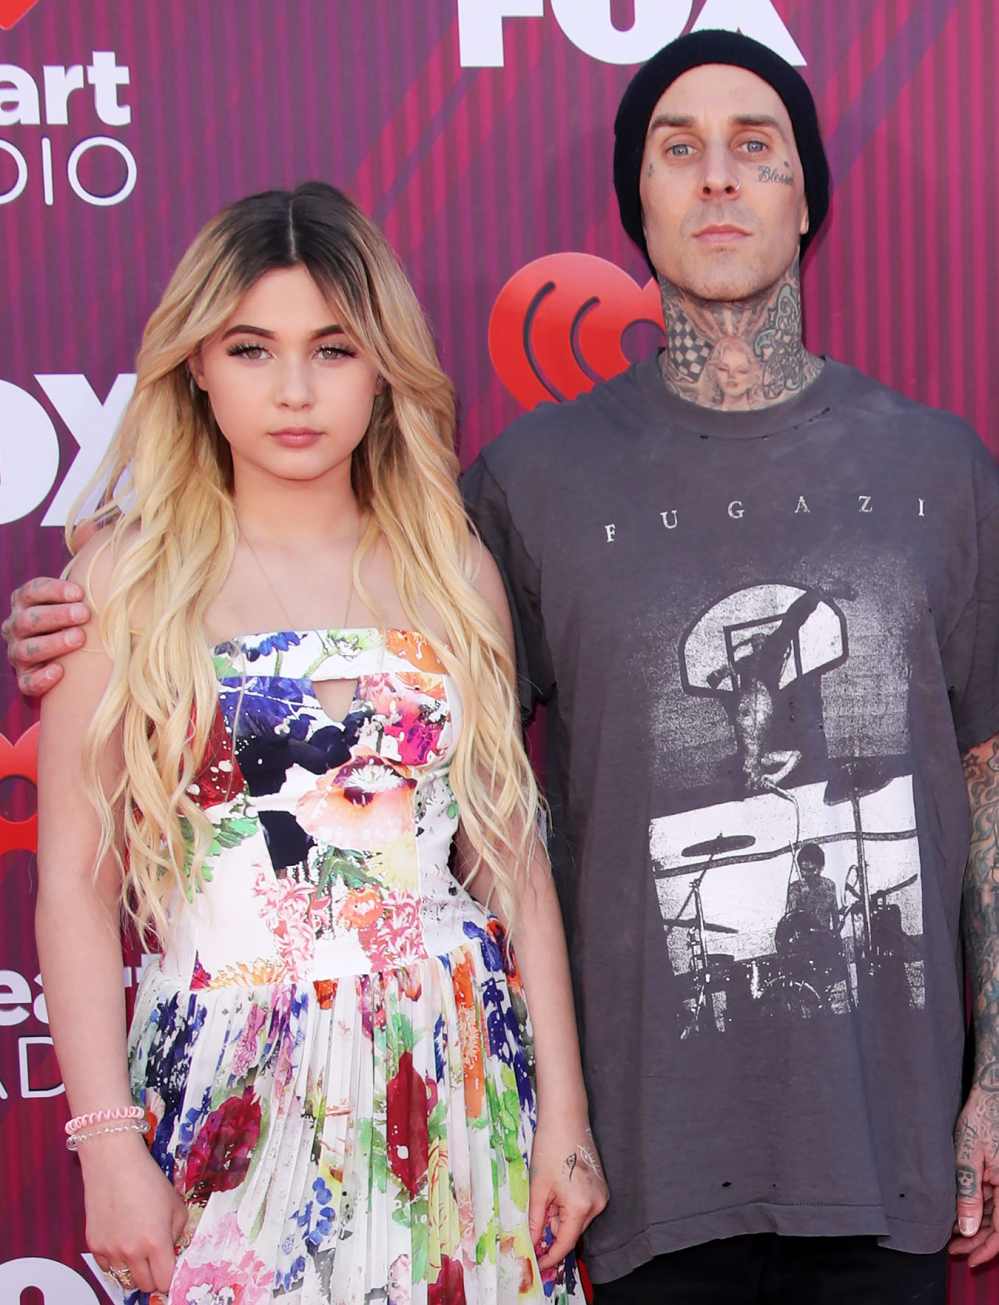 Watch Travis Barker’s Daughter Cover His Face Tattoos With Foundation